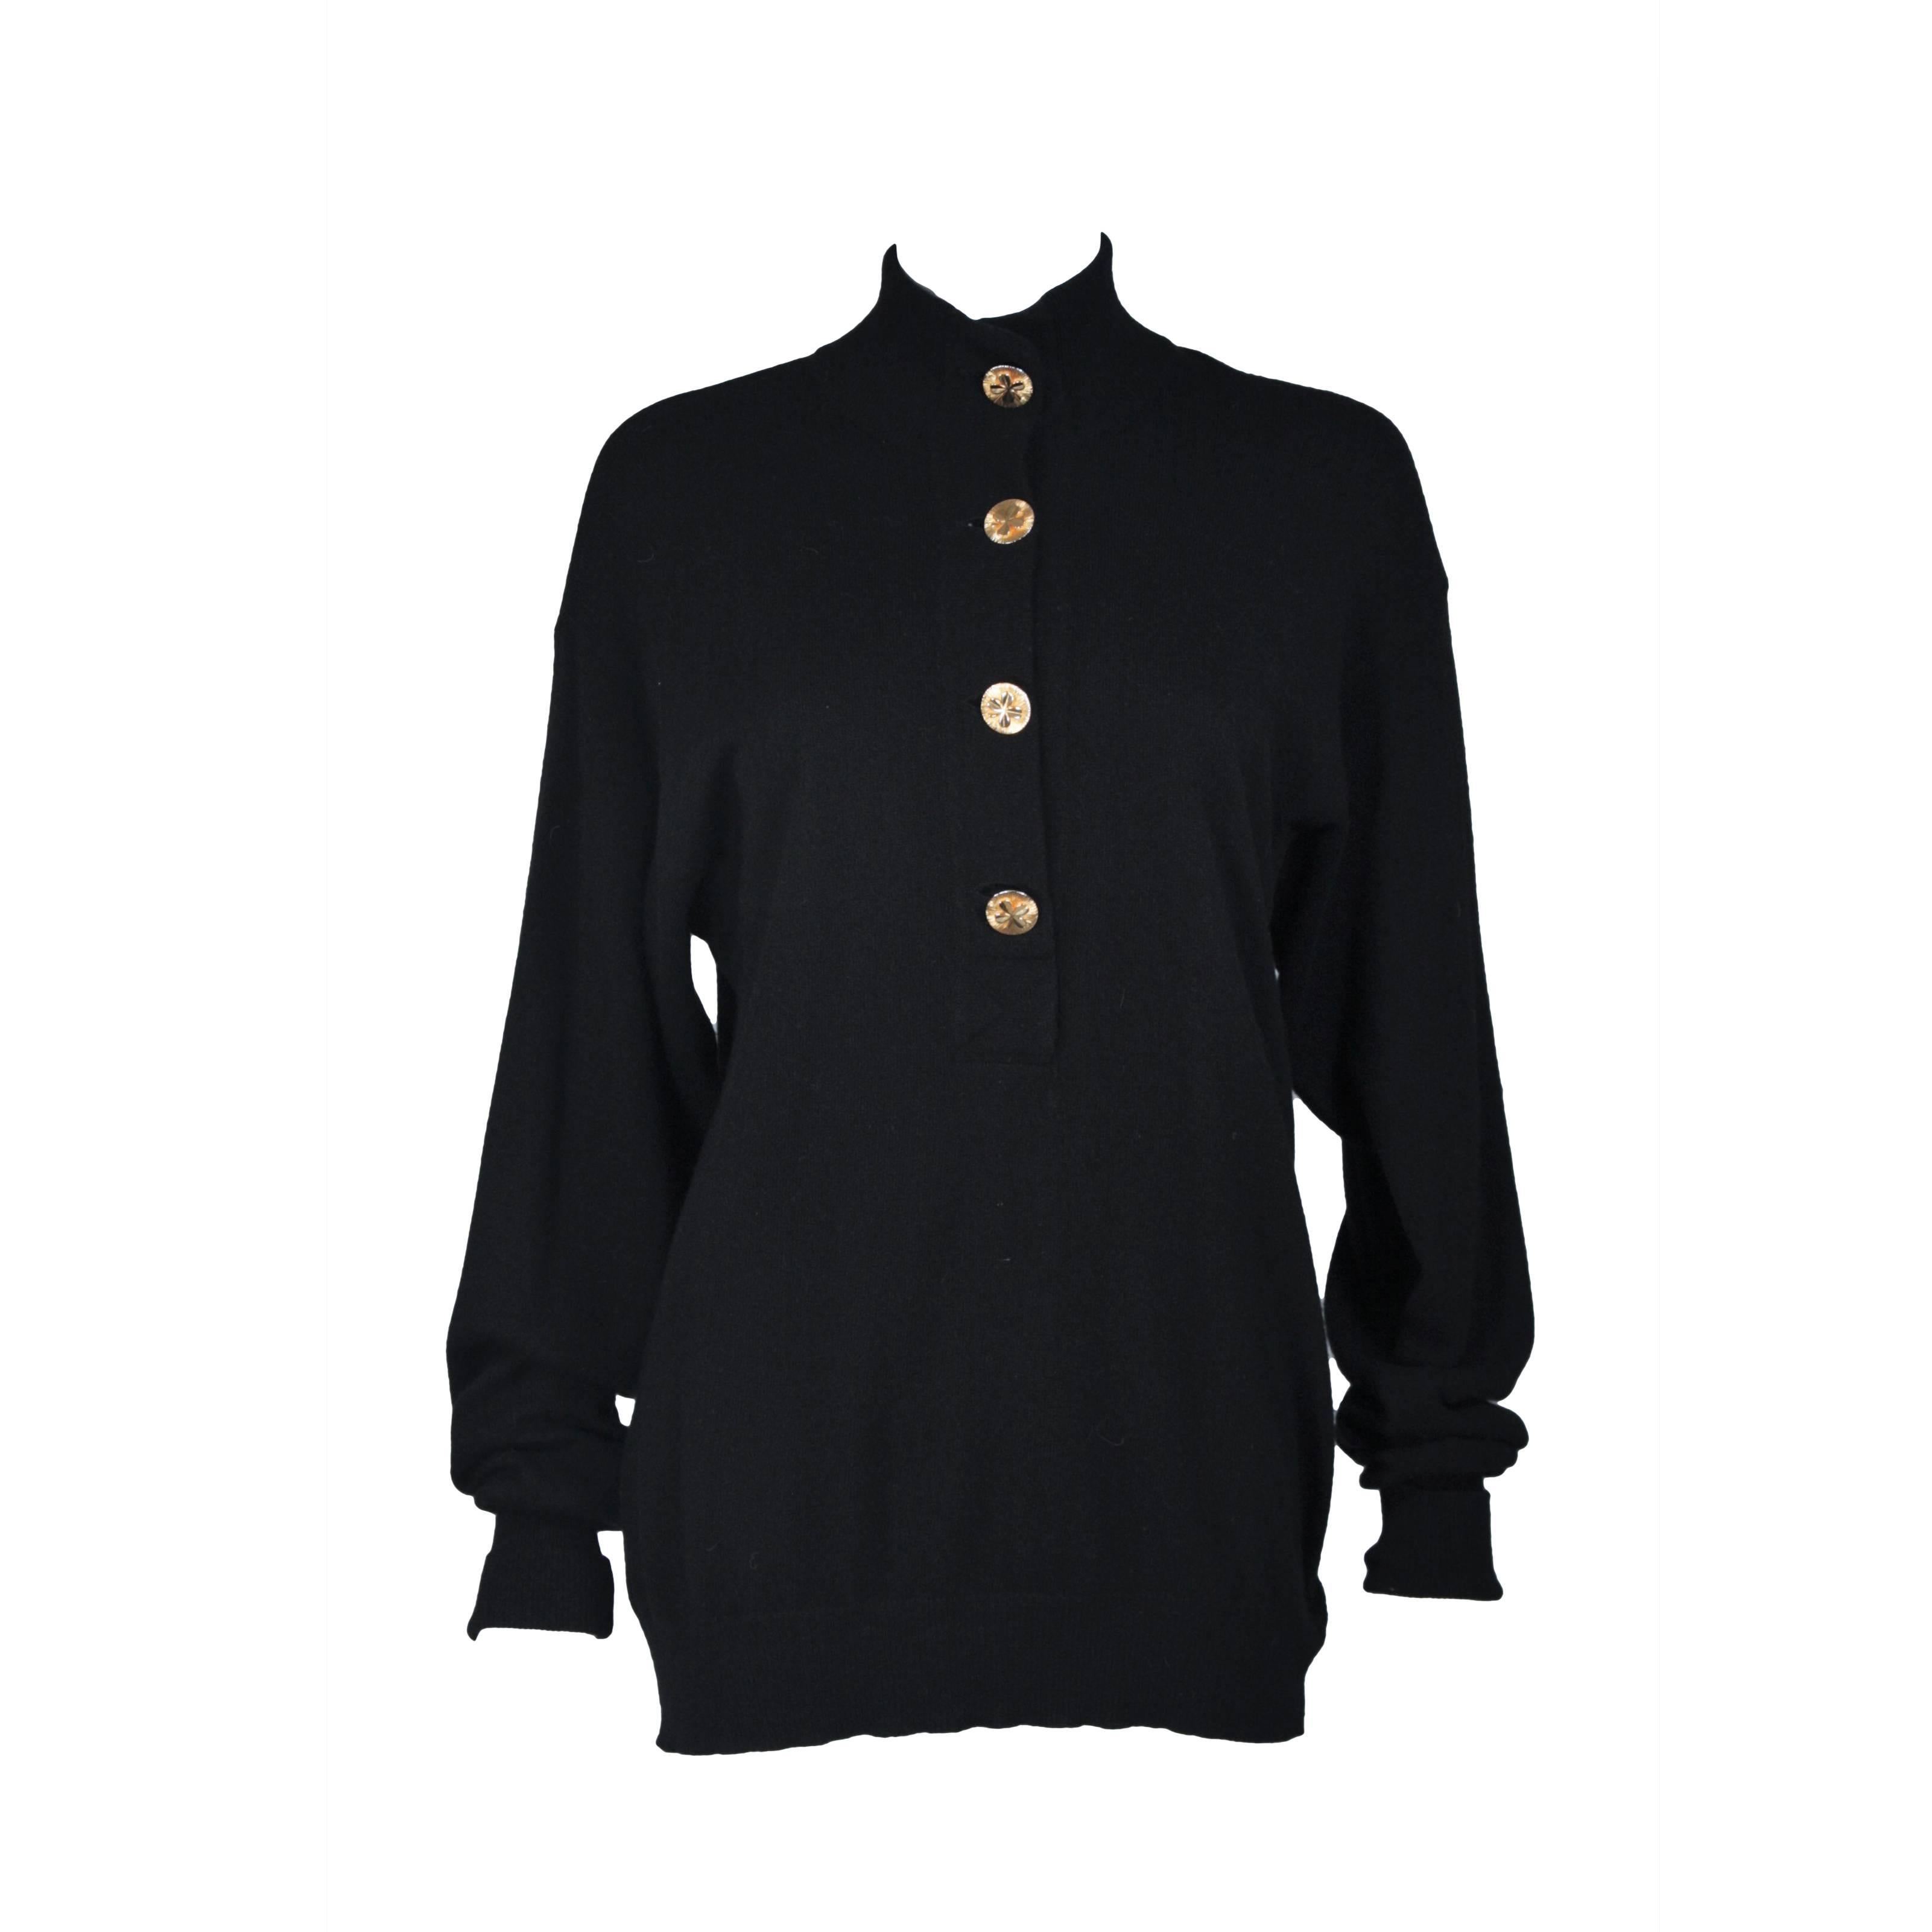 CHANEL Black Cashmere Sweater with Gold Buttons Size 38